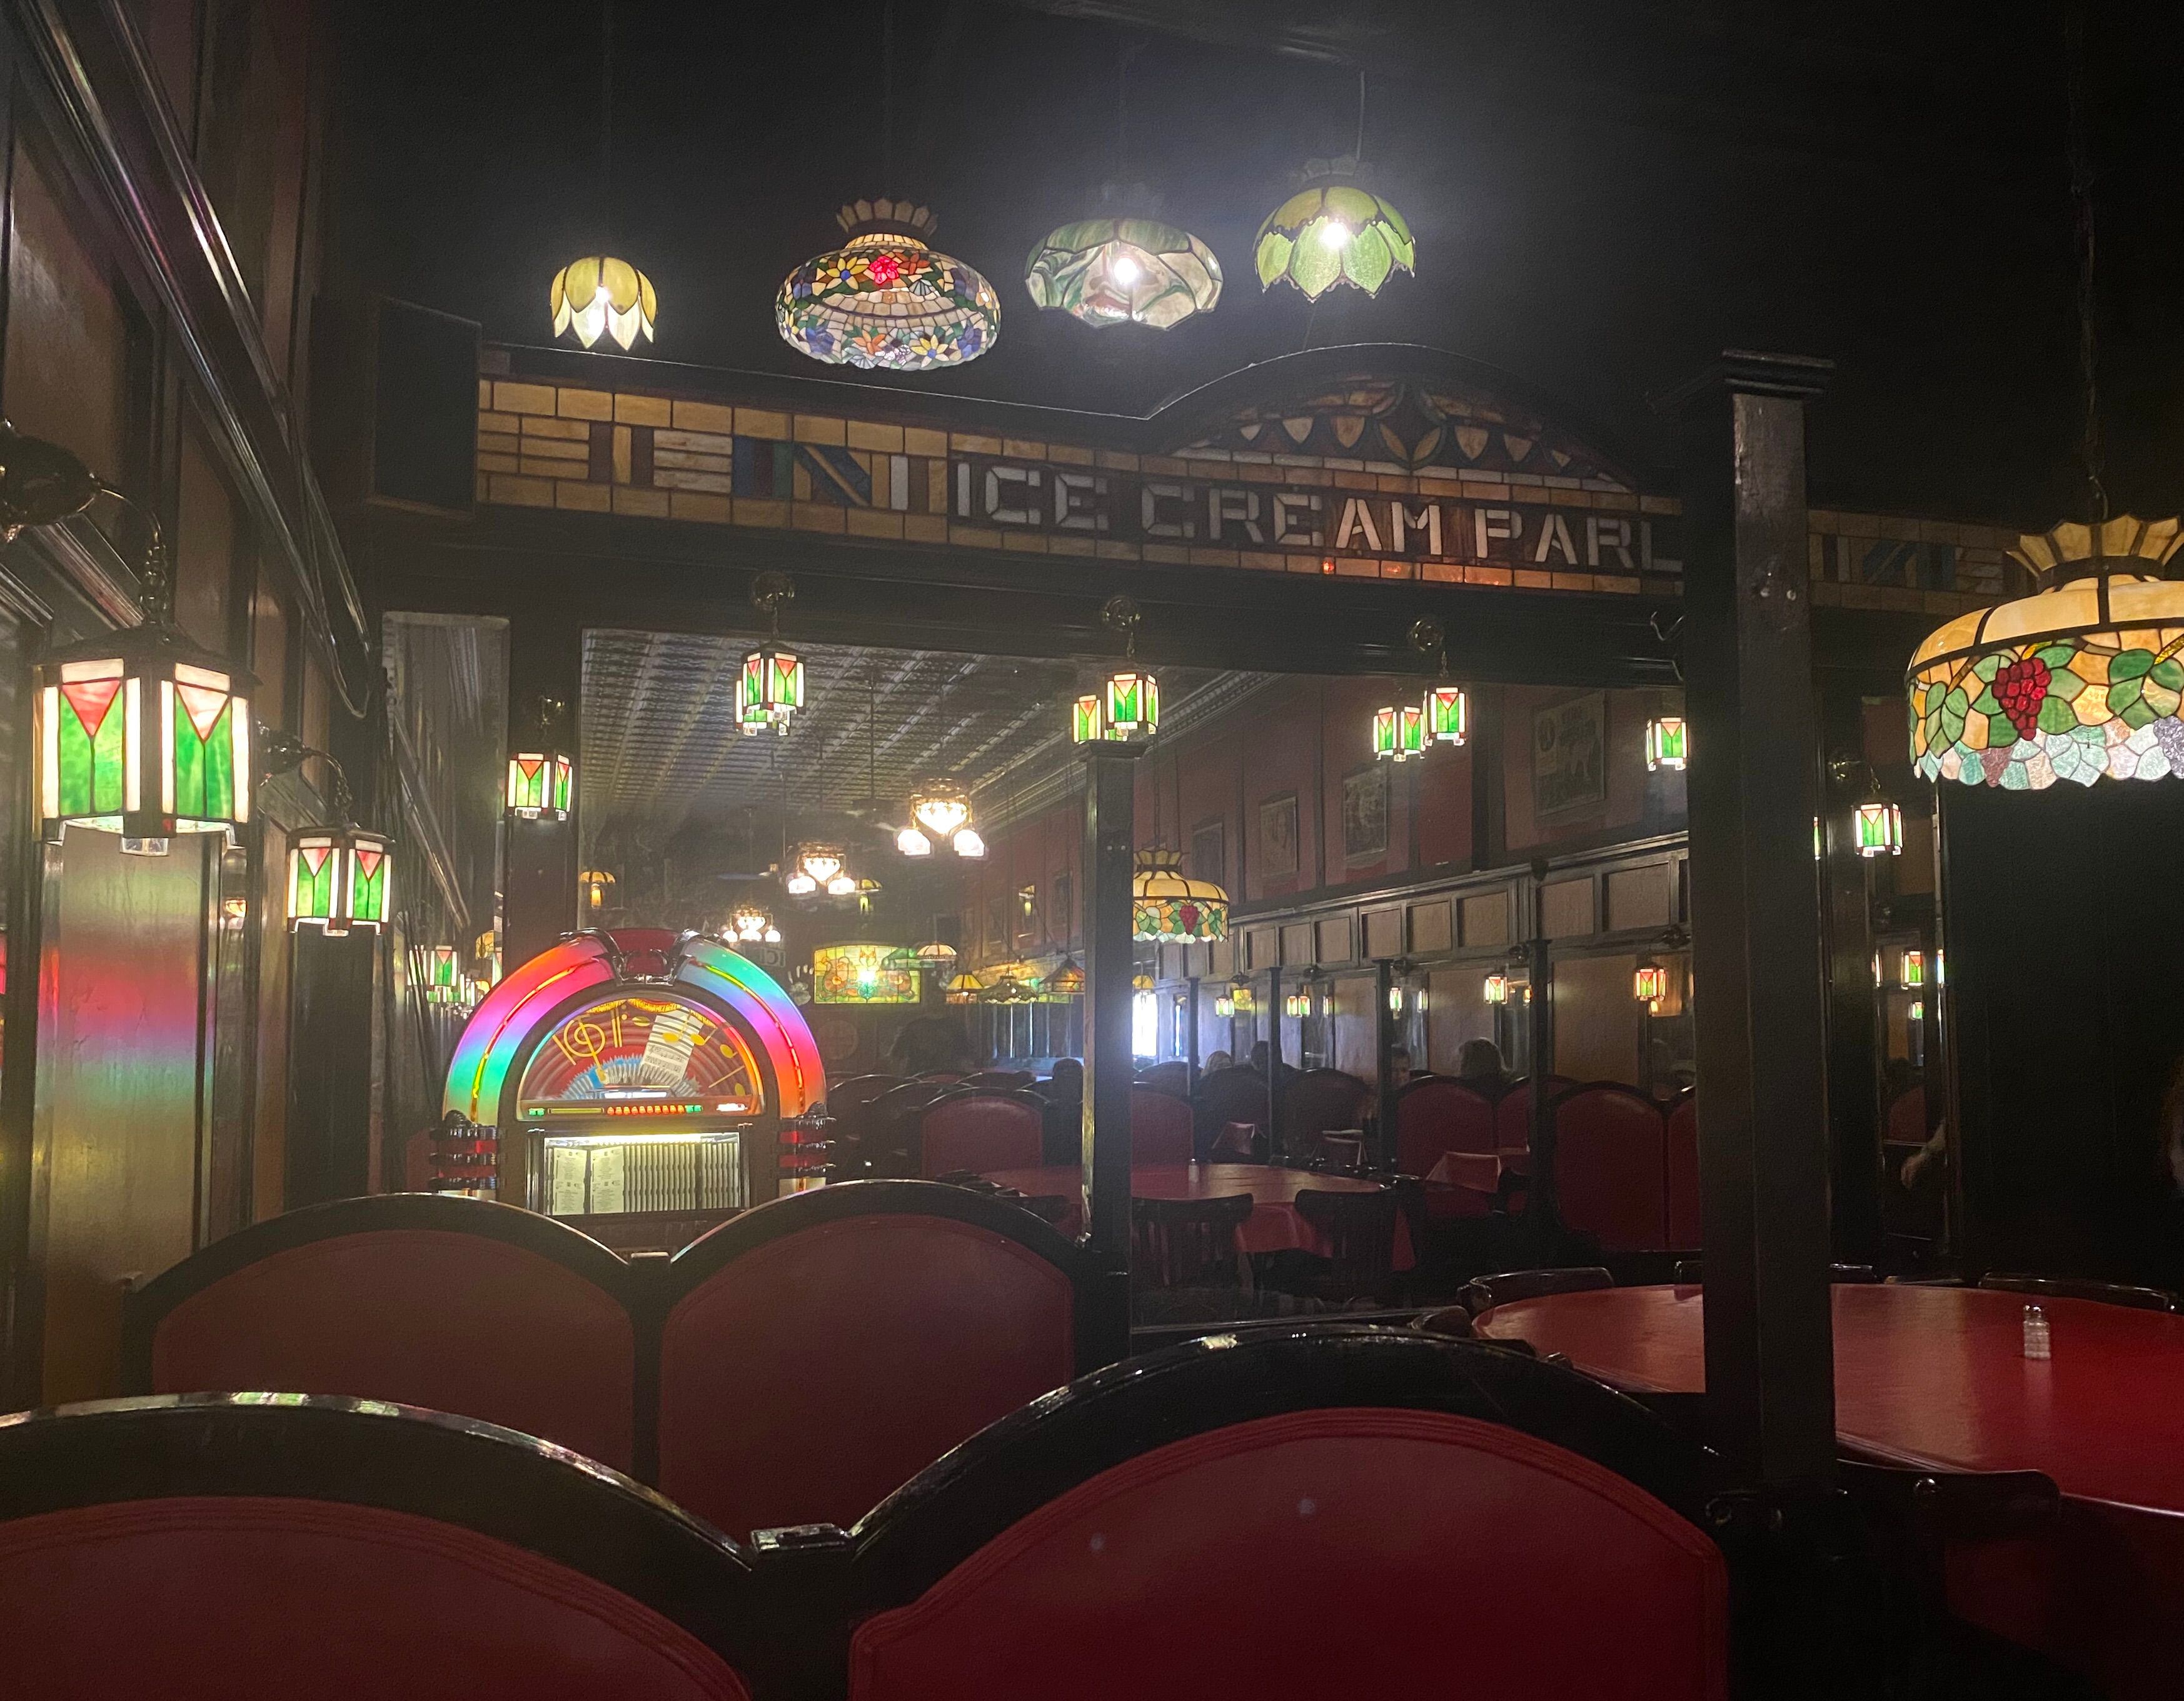 Stained glass, classic movie posters, cozy booths, mirrors and the mouth-watering smell of the pizza ovens blend together to form the aesthetic at Ottawa's Bianchi's Pizza.